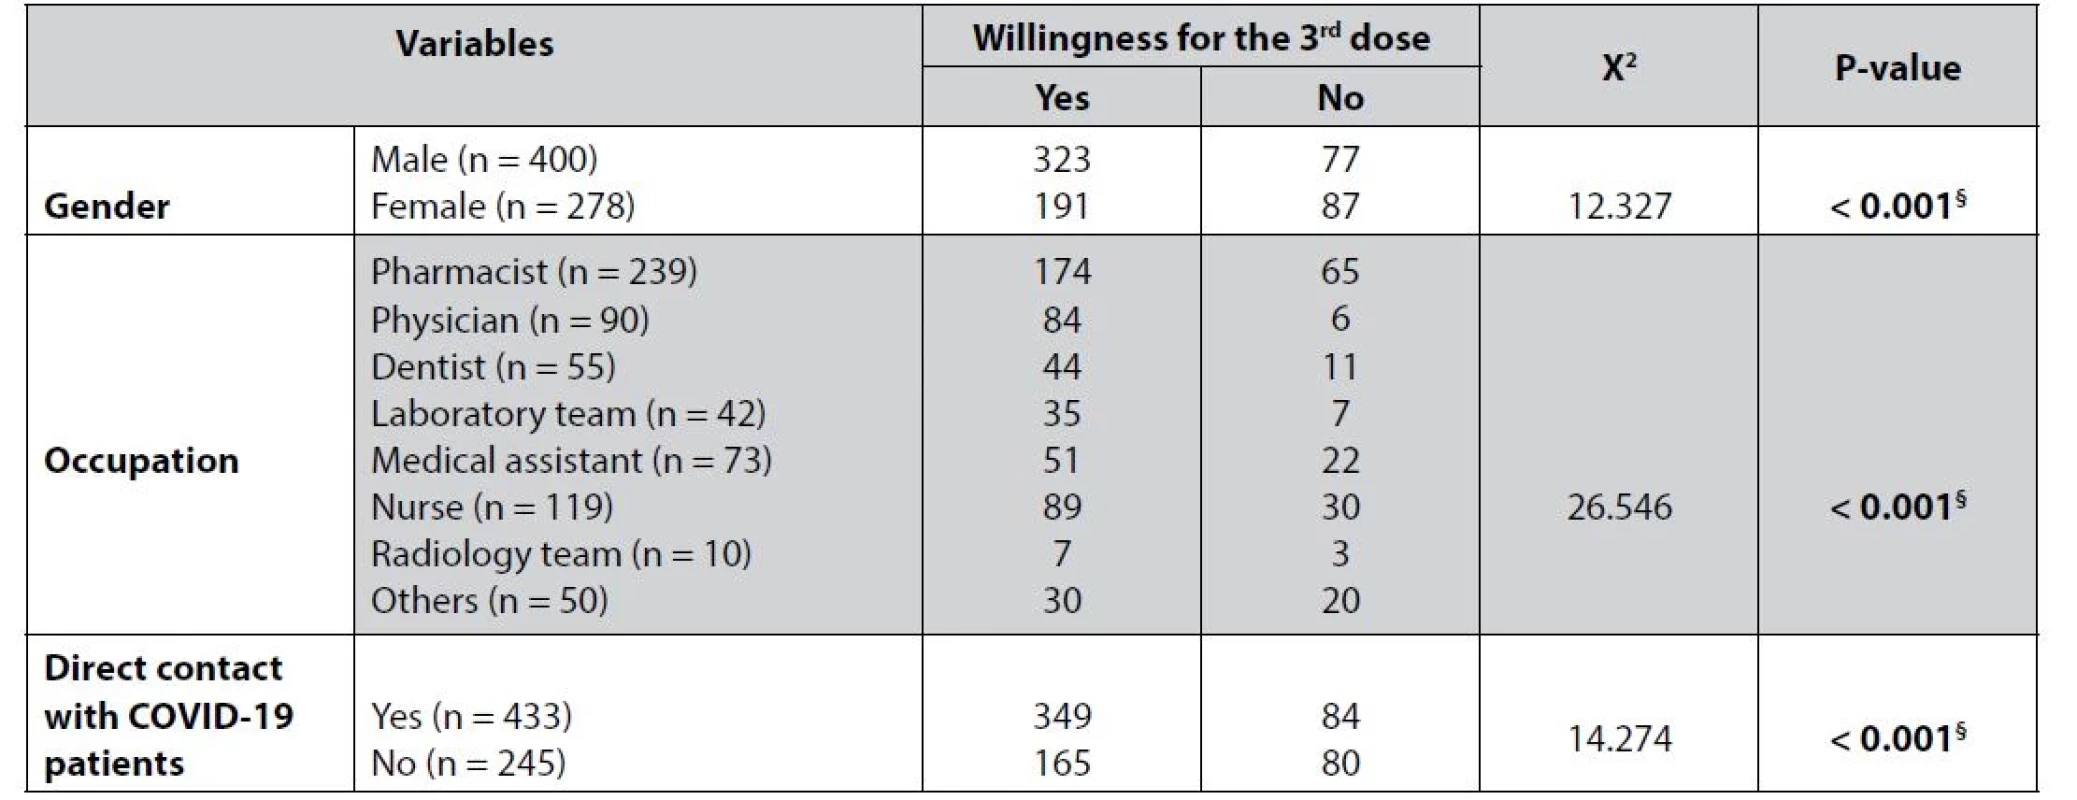 Association between gender, job, and contact level of the healthcare providers with patients willing to take the third dose of
the vaccine